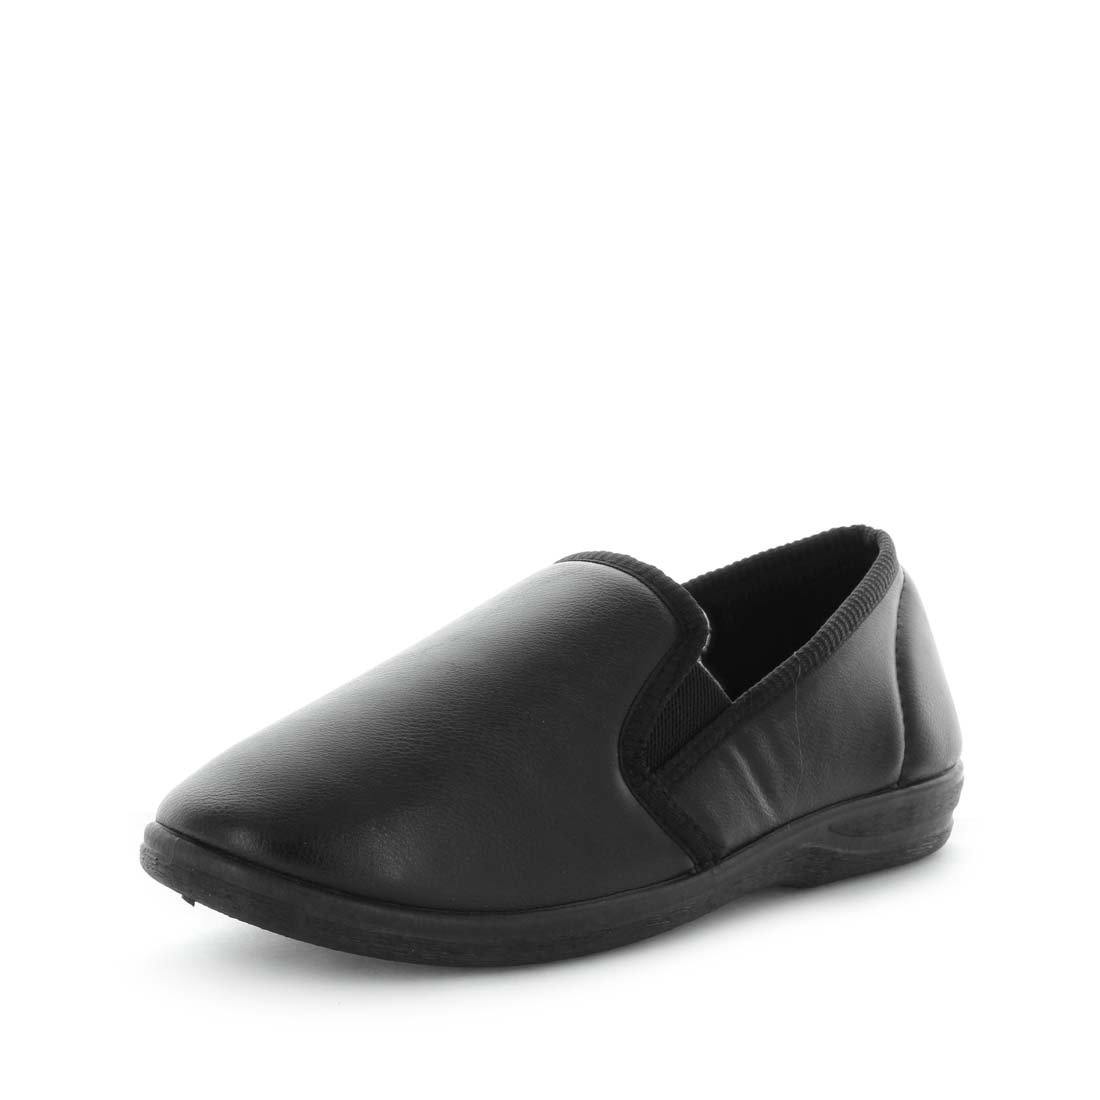 Load image into Gallery viewer, Classic mens slip on slipper, Edword by panda slippers. A black mens slipper made with soft materials and comfy fit design for the perfect indoor slipper.
